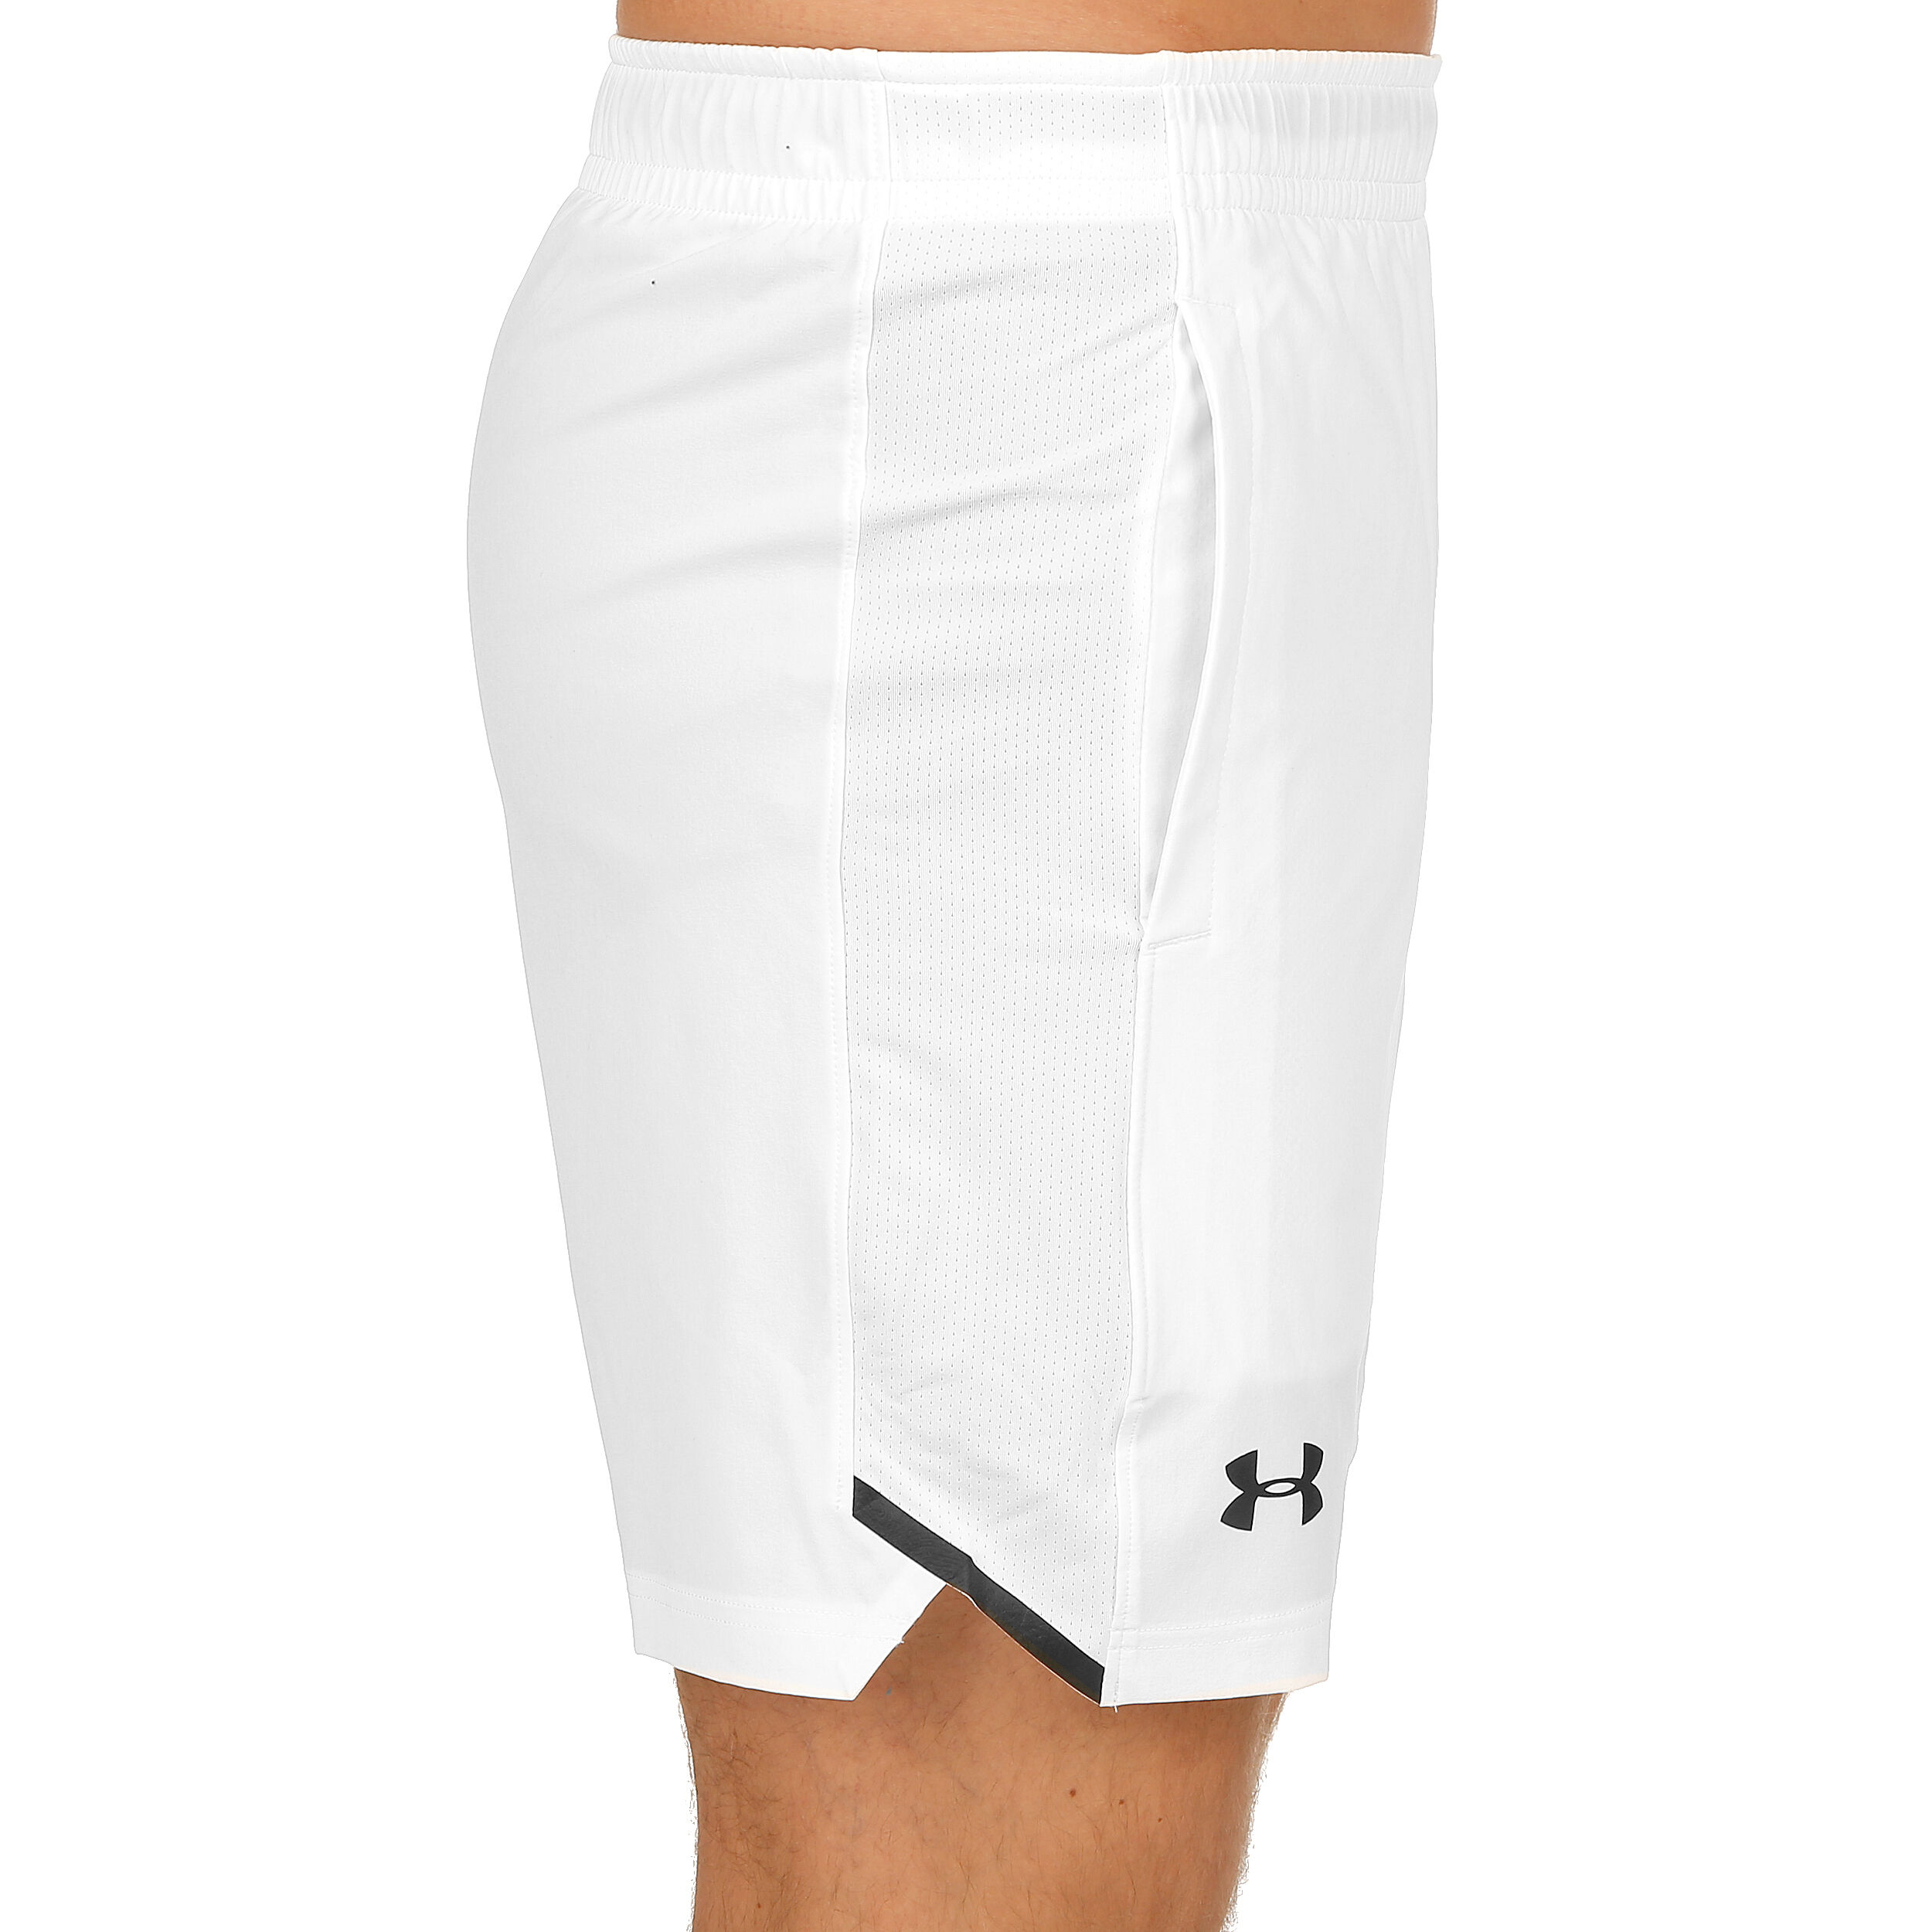 Under Armour Mens Forge 7 Tennis Shorts 